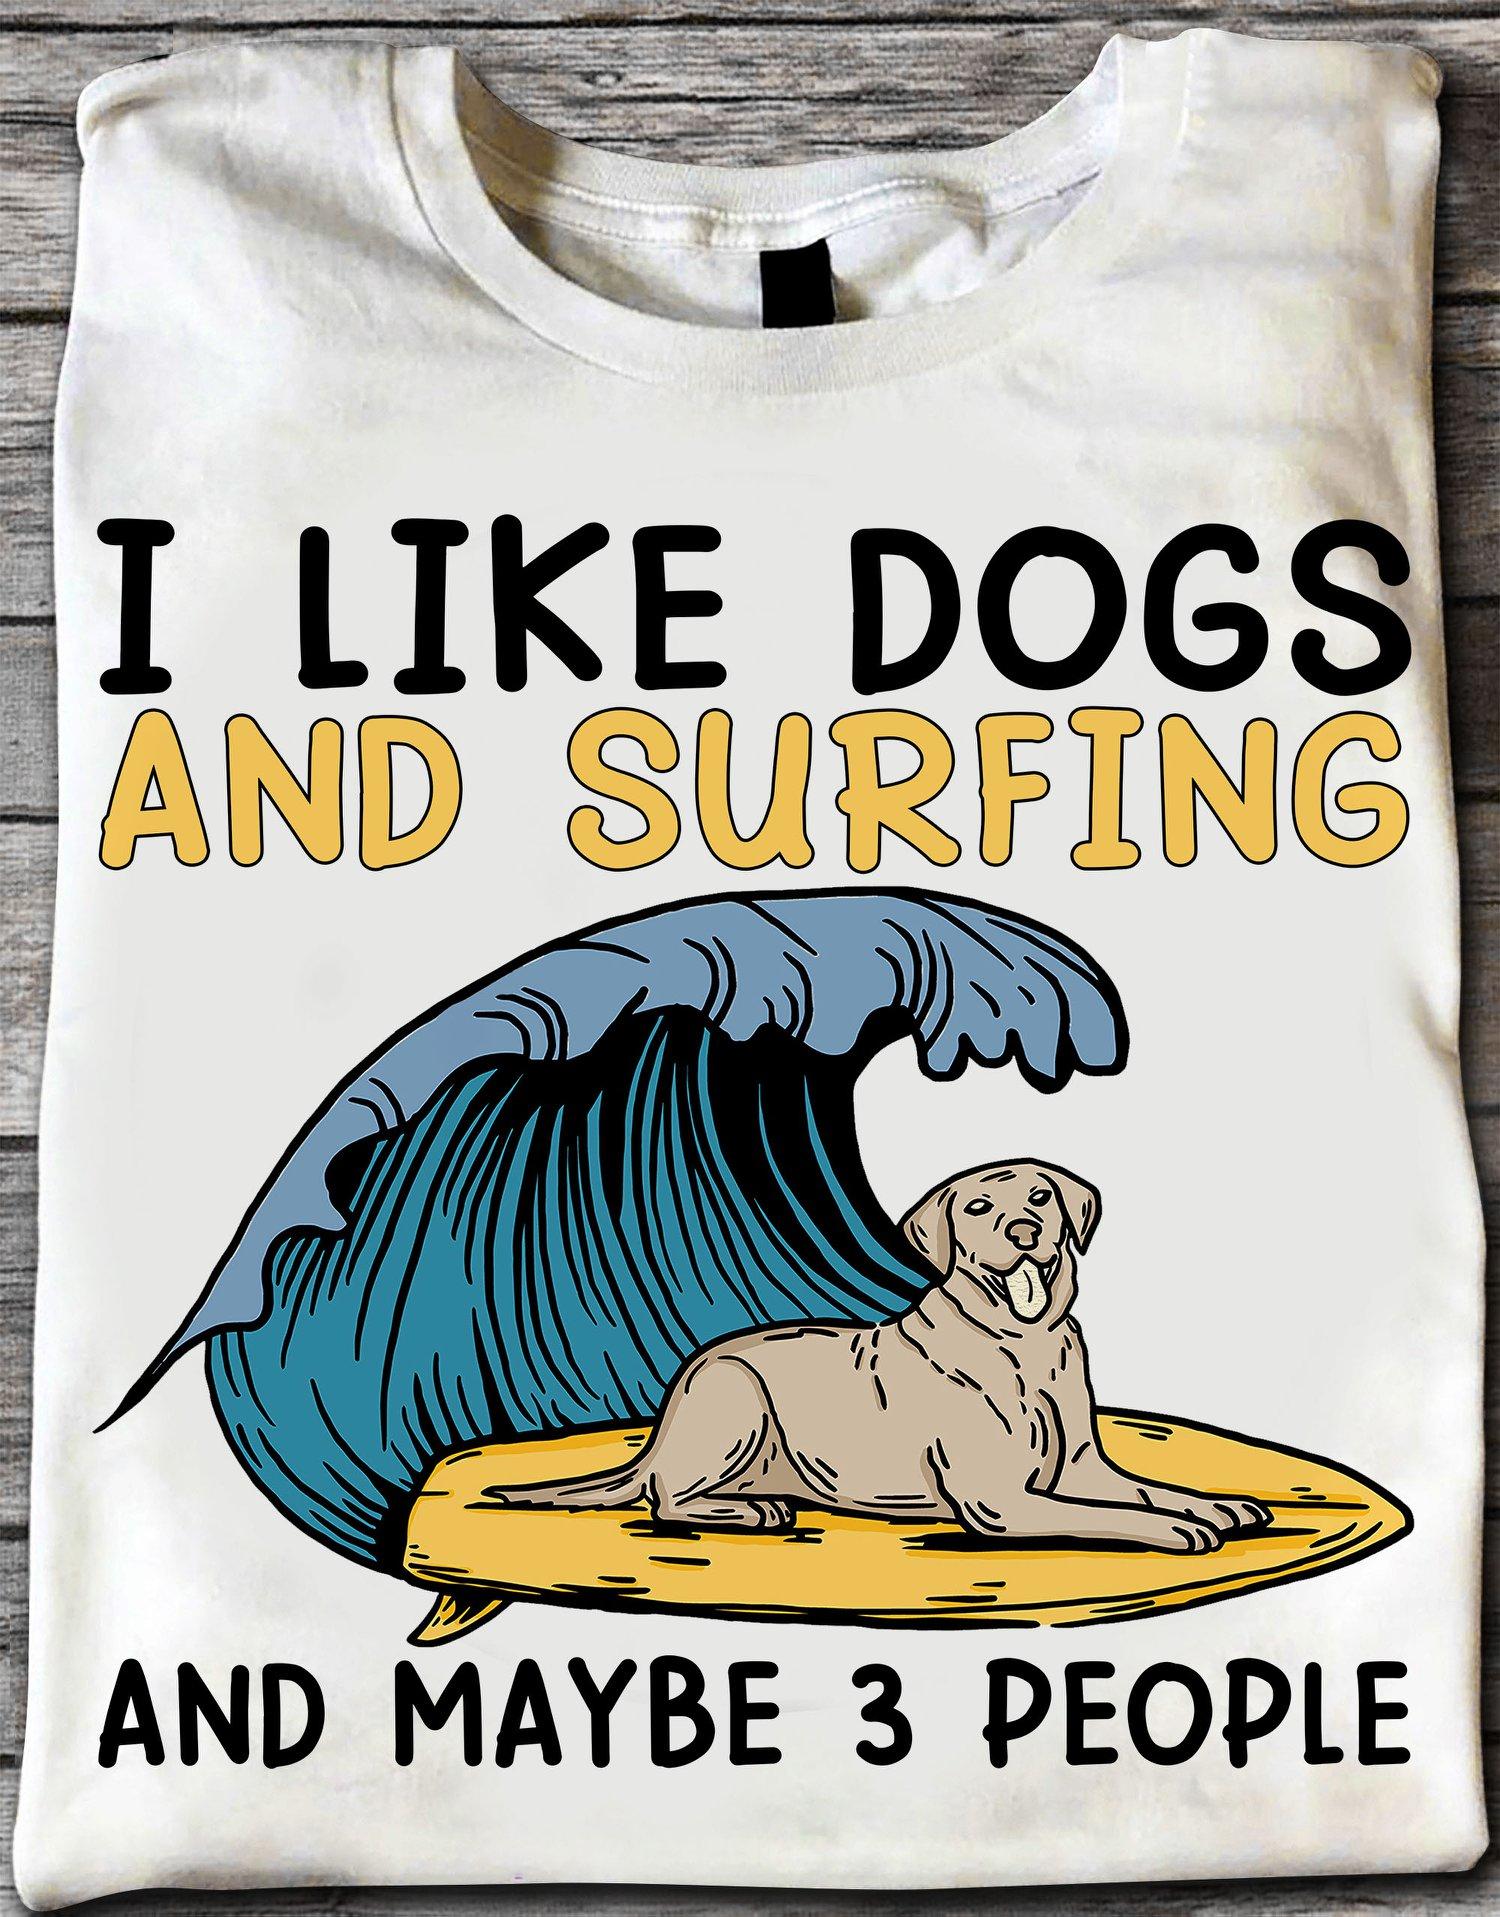 I like dogs and surfing and maybe 3 people - Go surfing with dogs, wave surfing sport